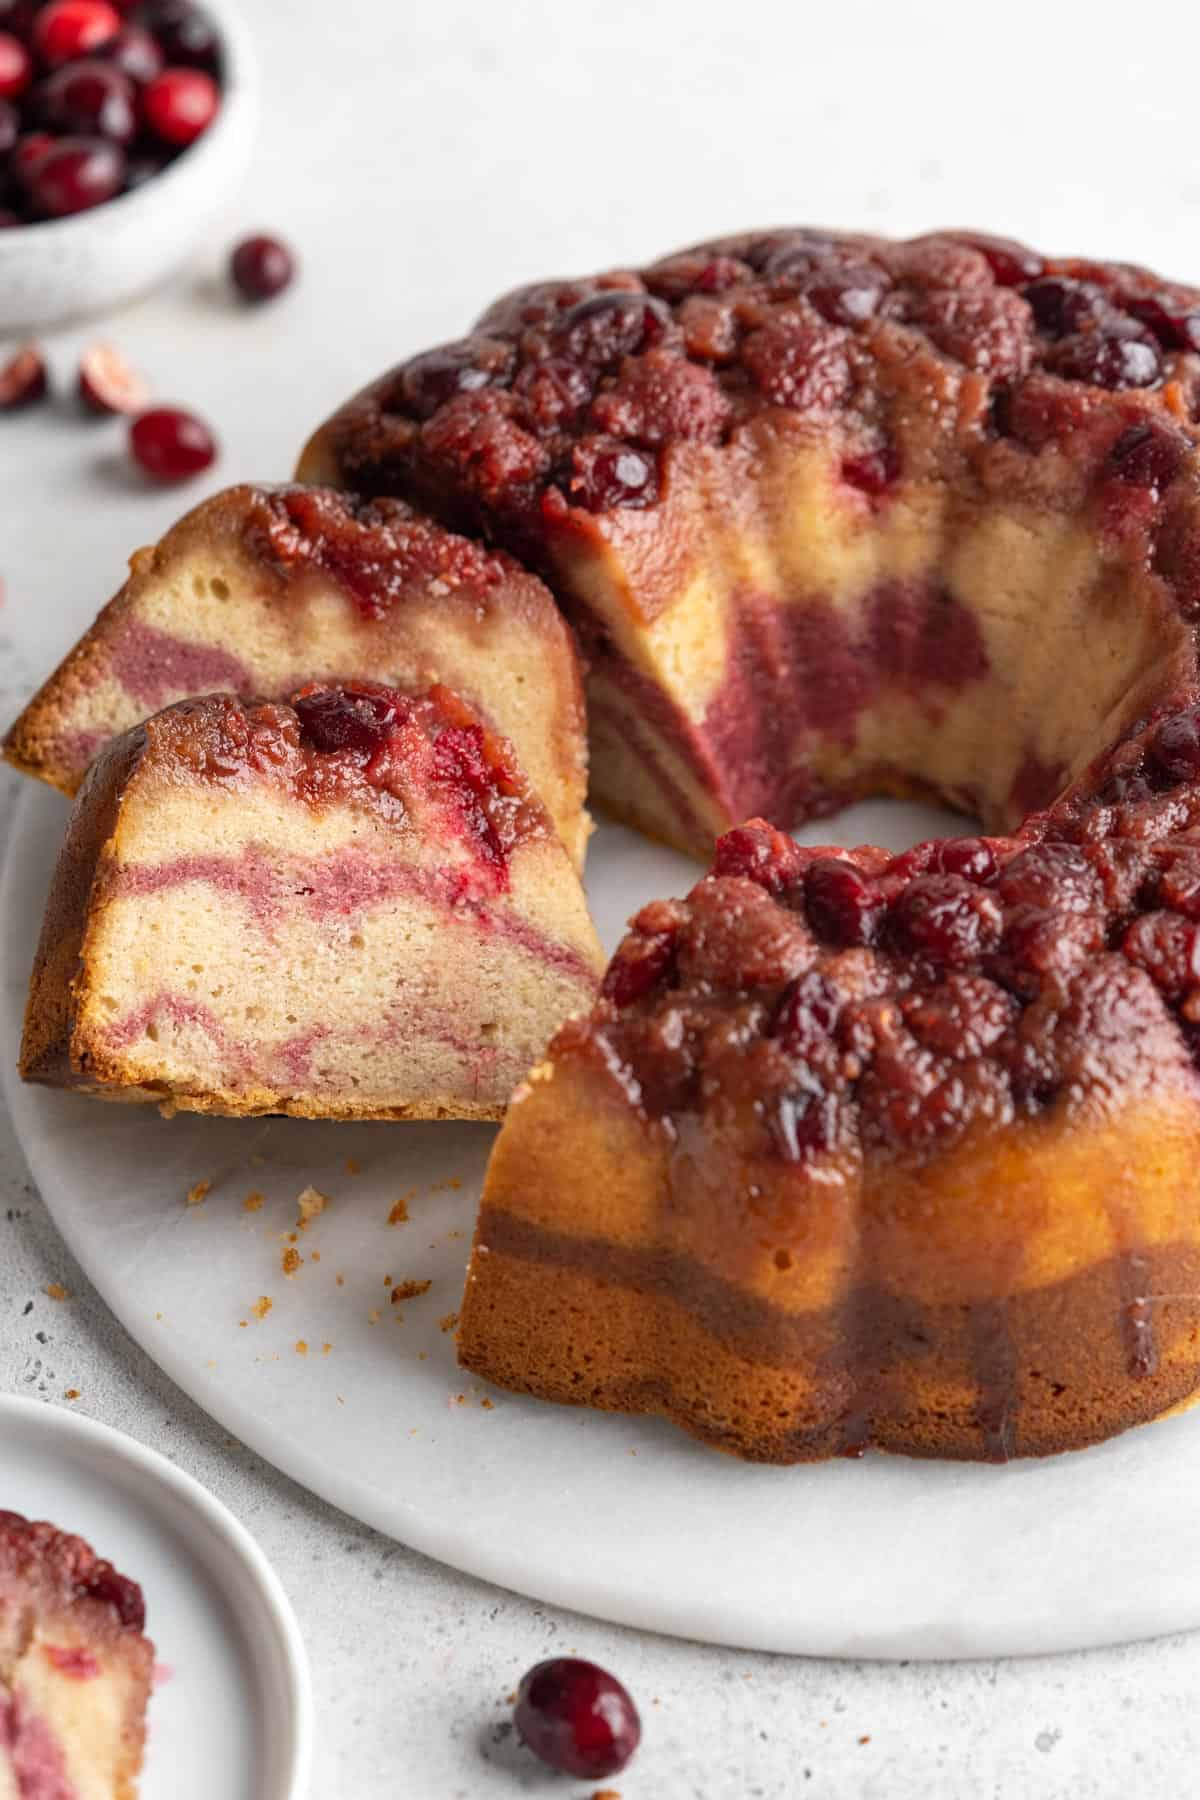 The cranberry bundt cake with slices cut out of it and leaning over on the platter.